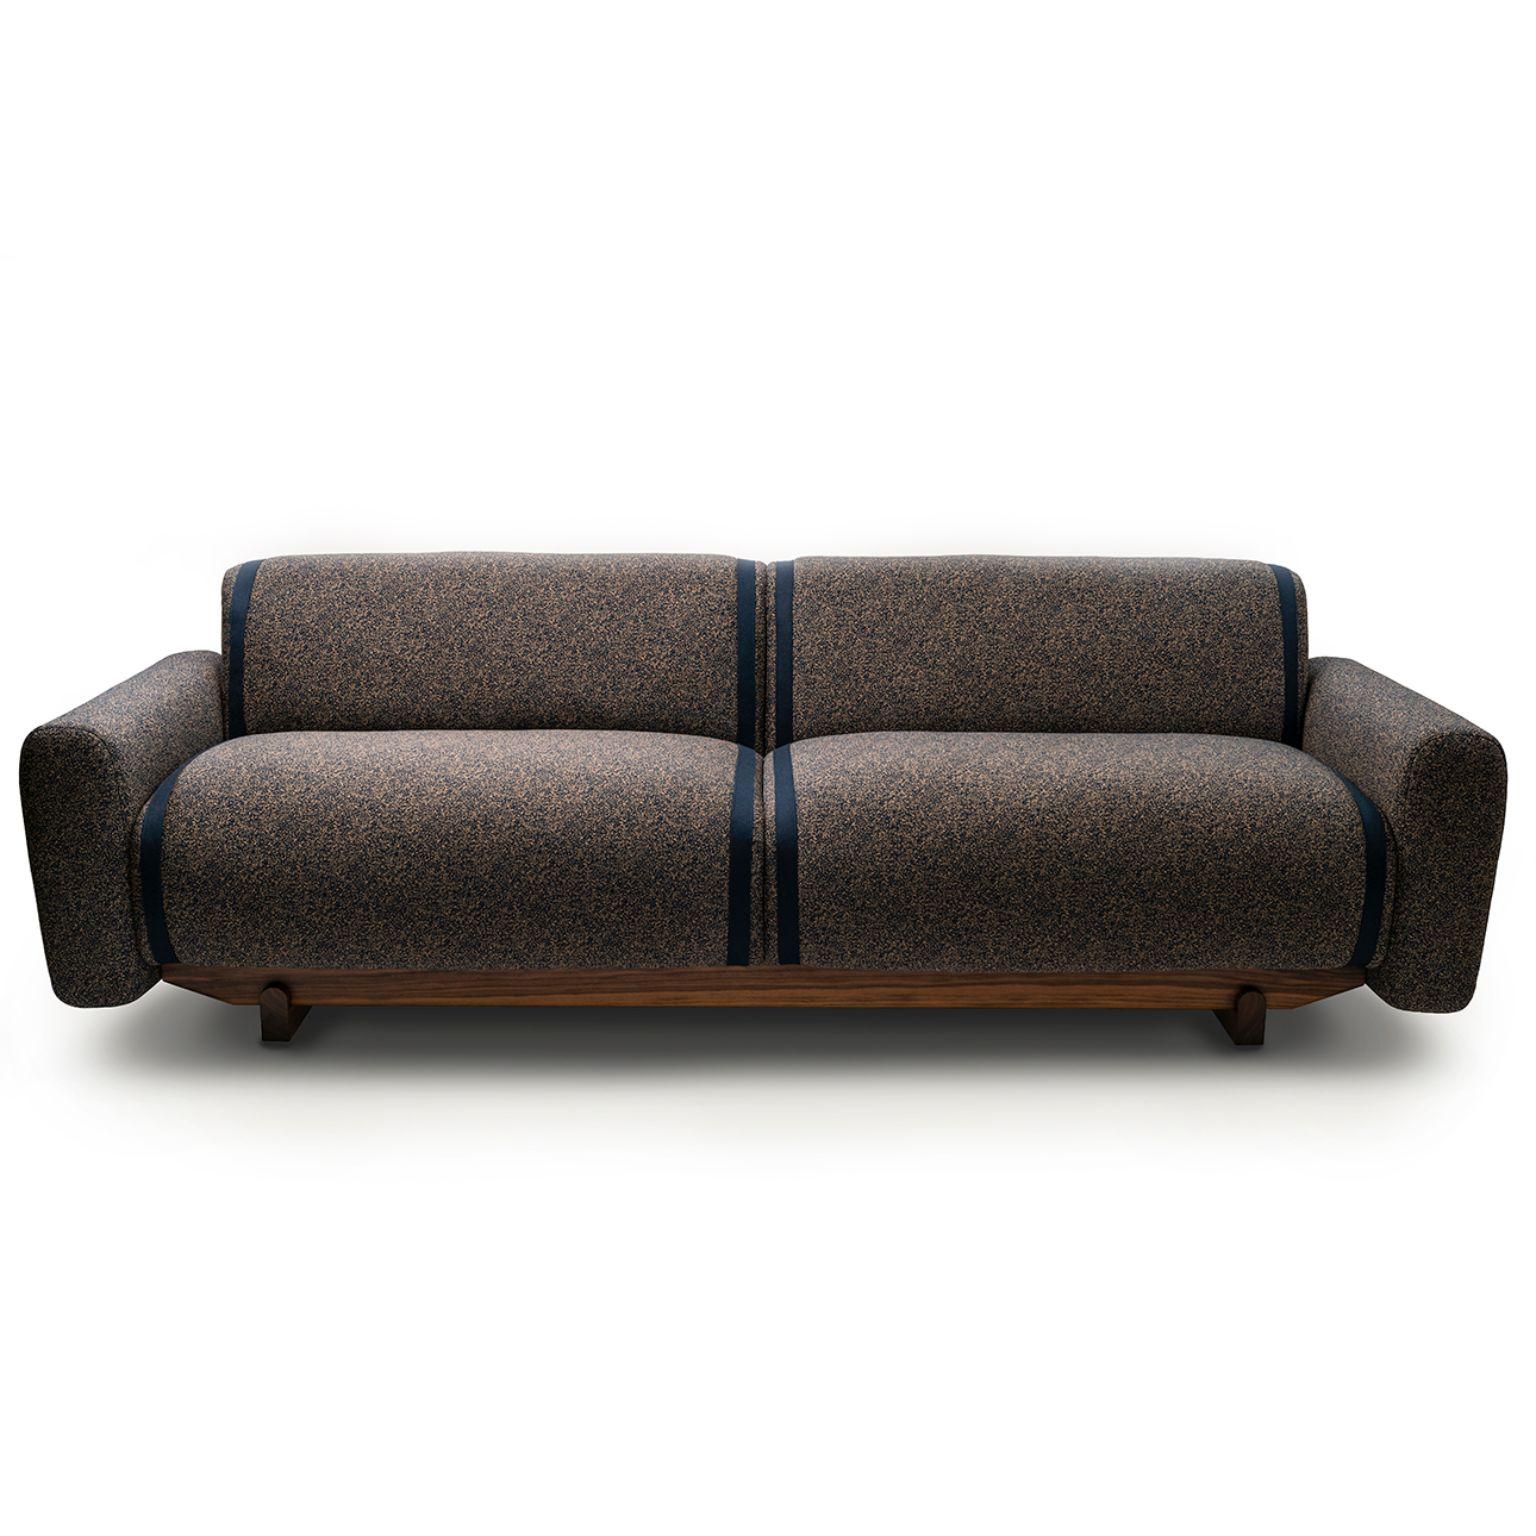 3 Seats Pola sofa by Sebastian Herkner.
Materials: Upholstery: fabric or leather
 Structure: stained wood, Noce Canaletto solid wood
Dimensions: W247.5 x D92.5 x H75.5 cm.




The massive wood base of the Pola sofa is a nod to Sebastian